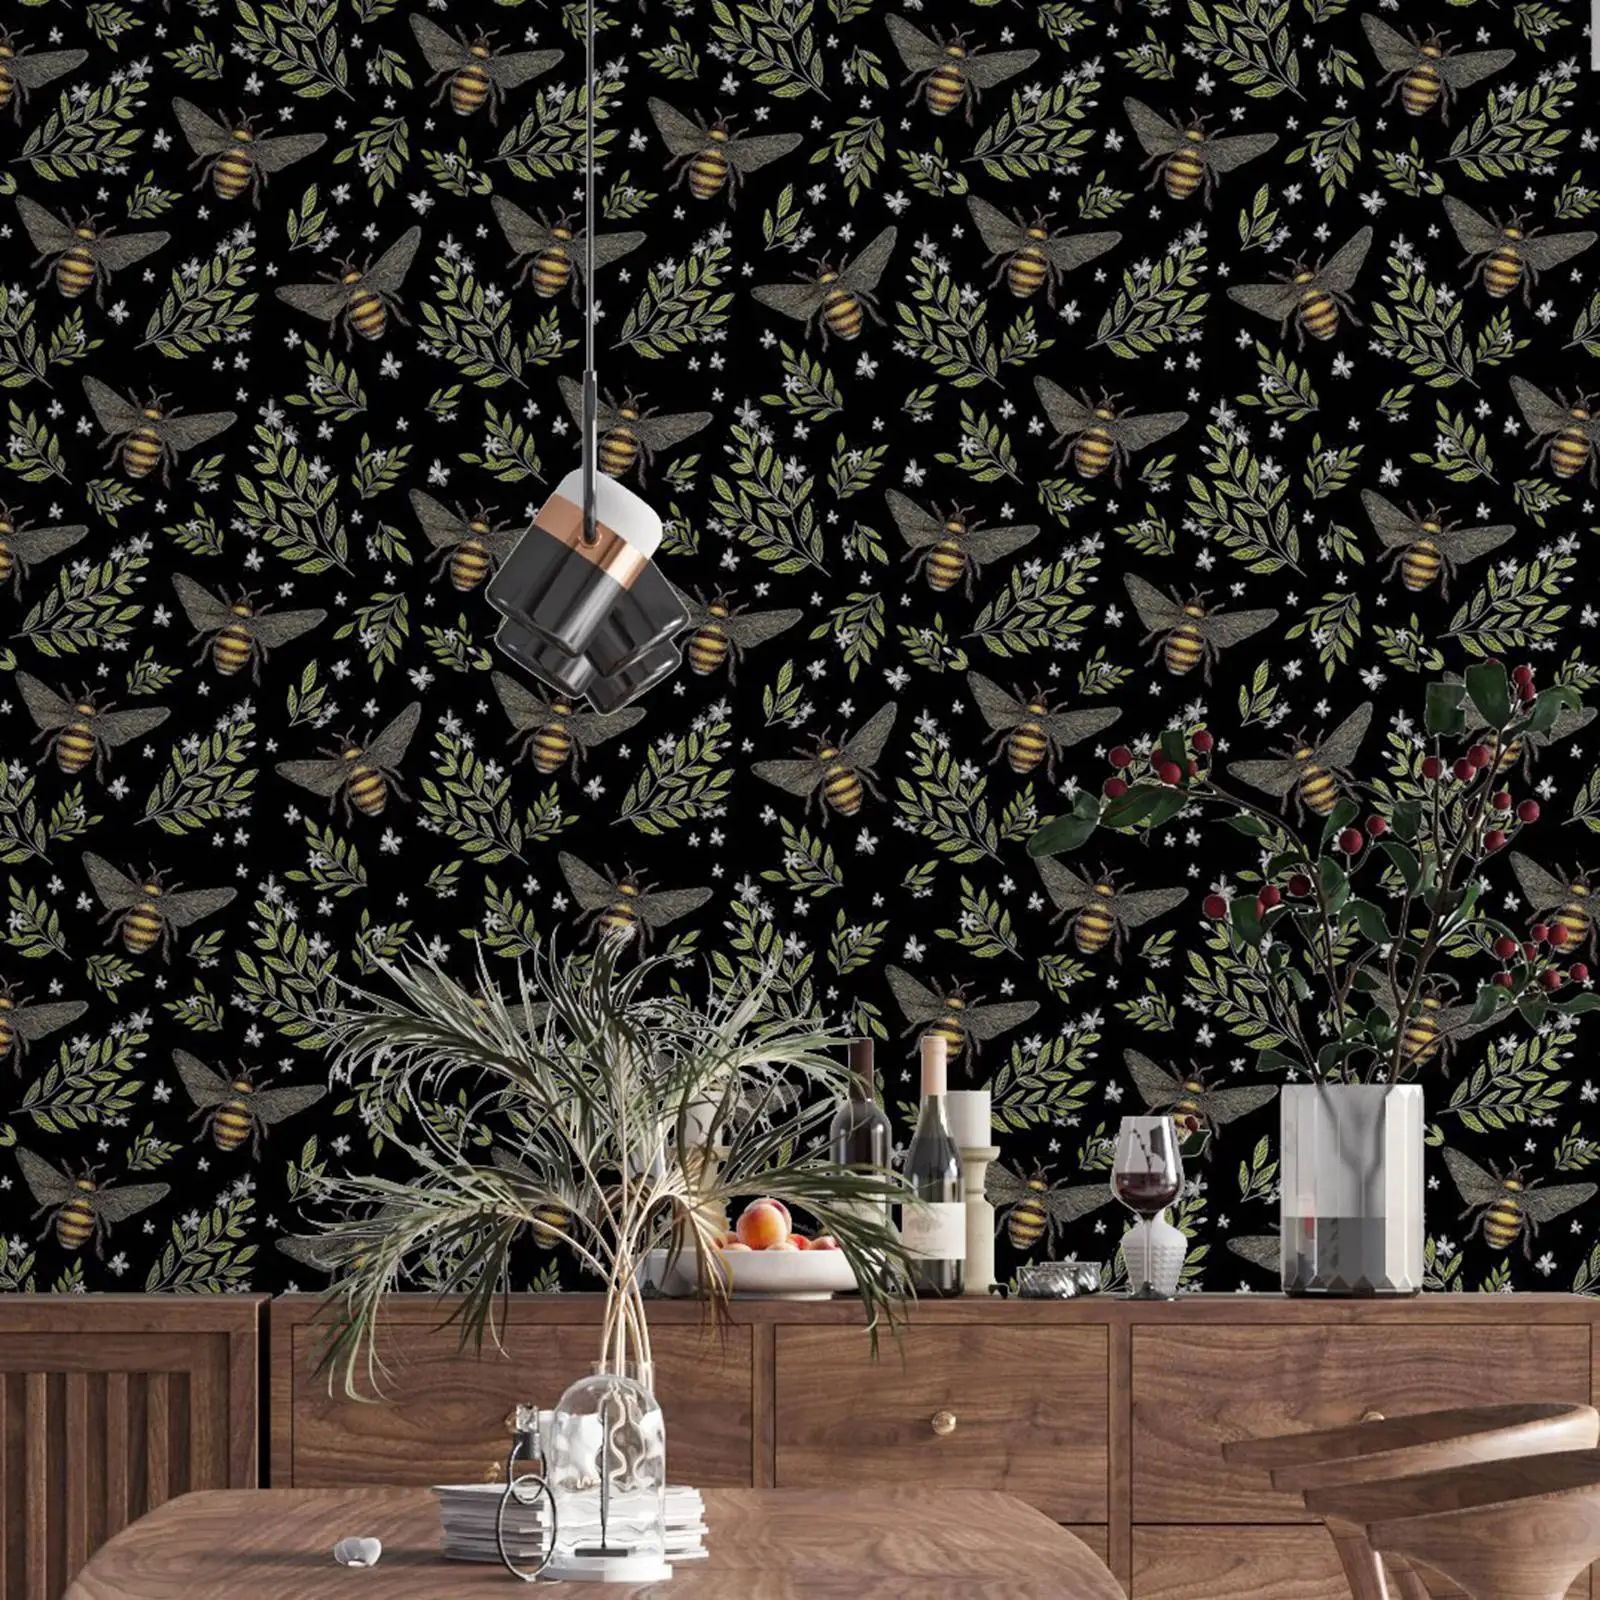 Spring Bee Removable Wallpaper in Midnight Black, Honey Bee Wall Paper in black back ground for living room bedroom HB0624001 смарт часы huawei watch fit 2 yda b09s 55028916 midnight black